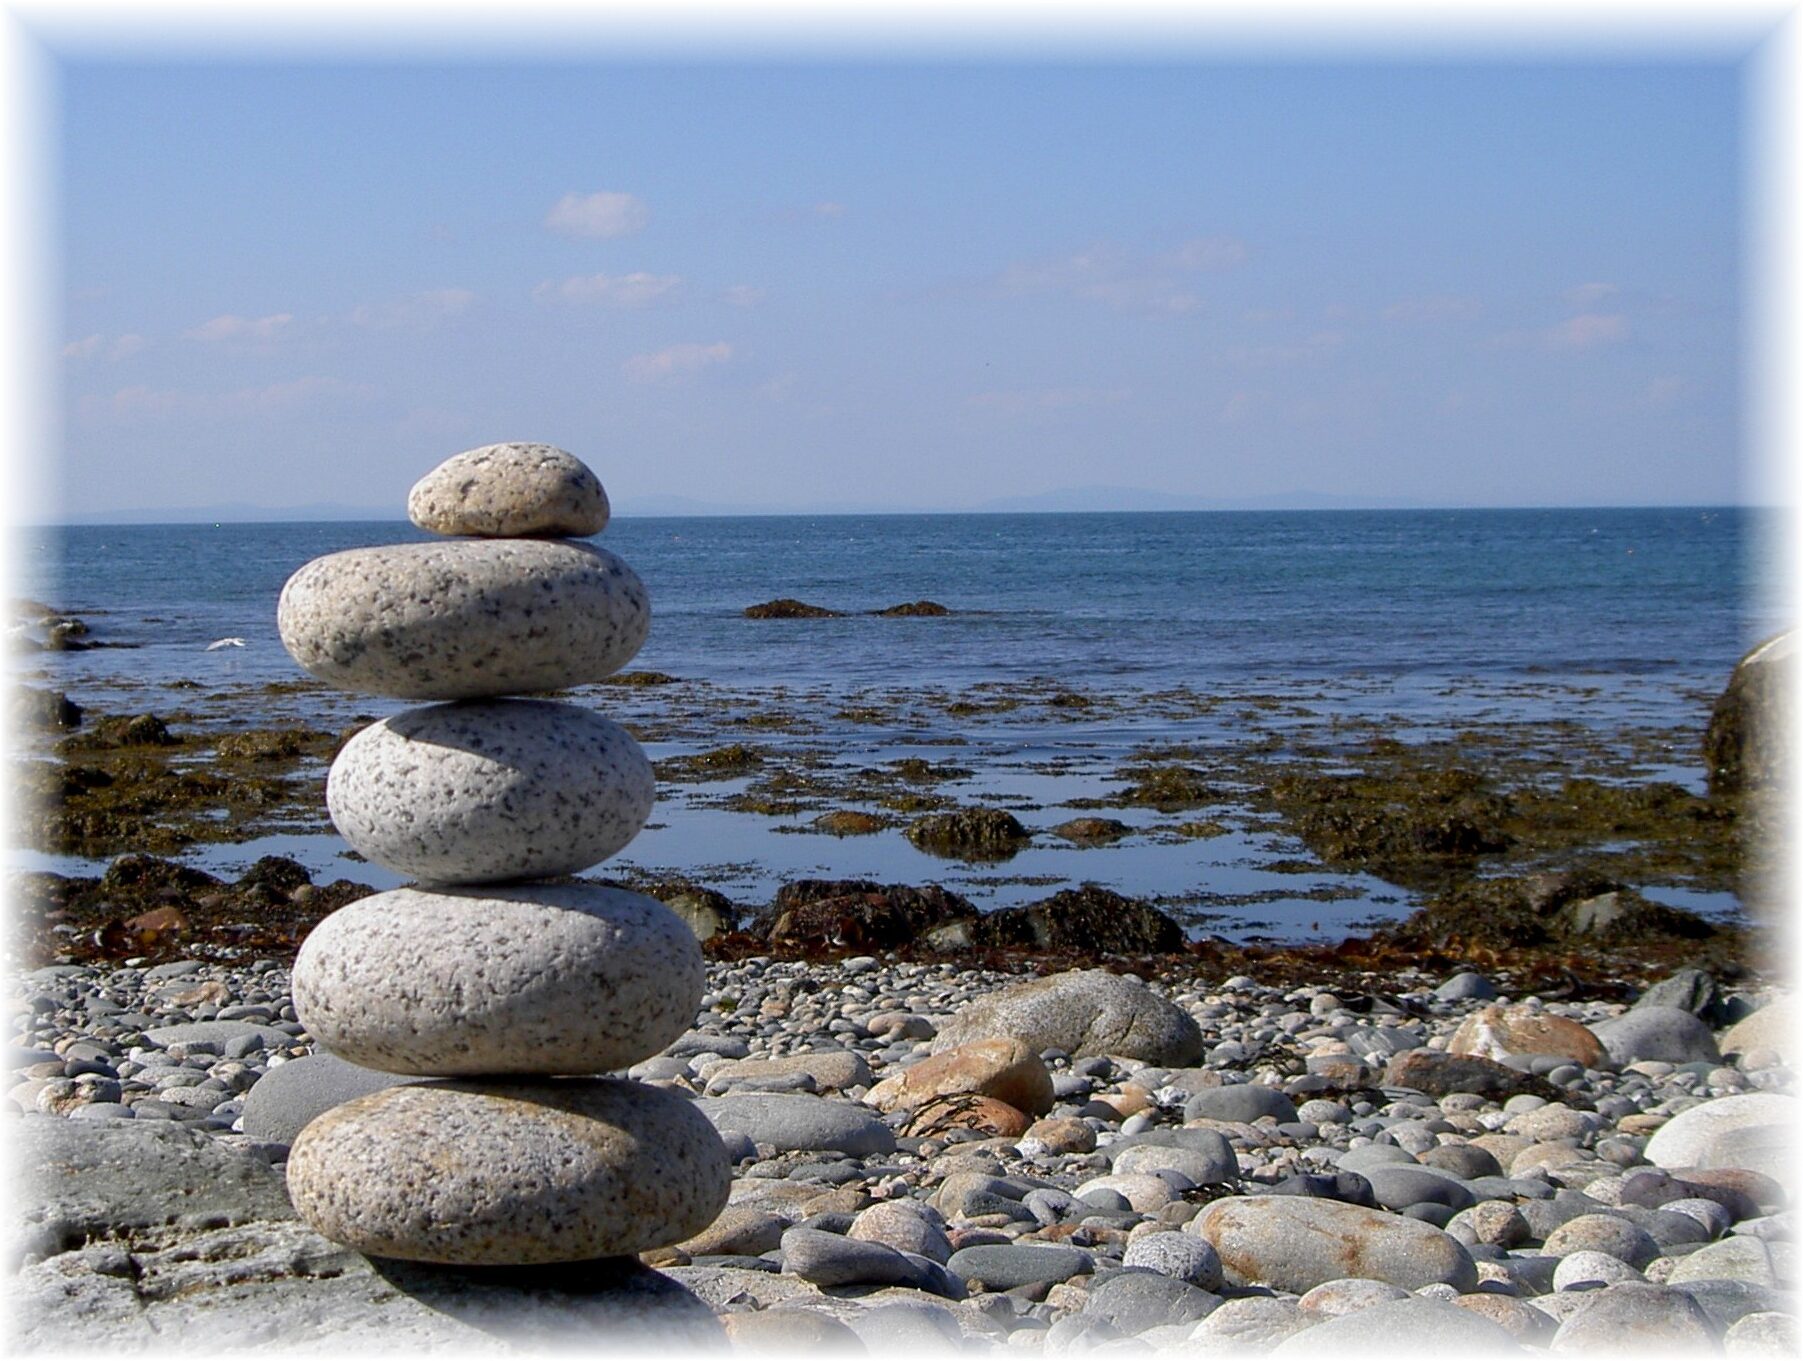 Picture of stones placed into a tower by the ocean.